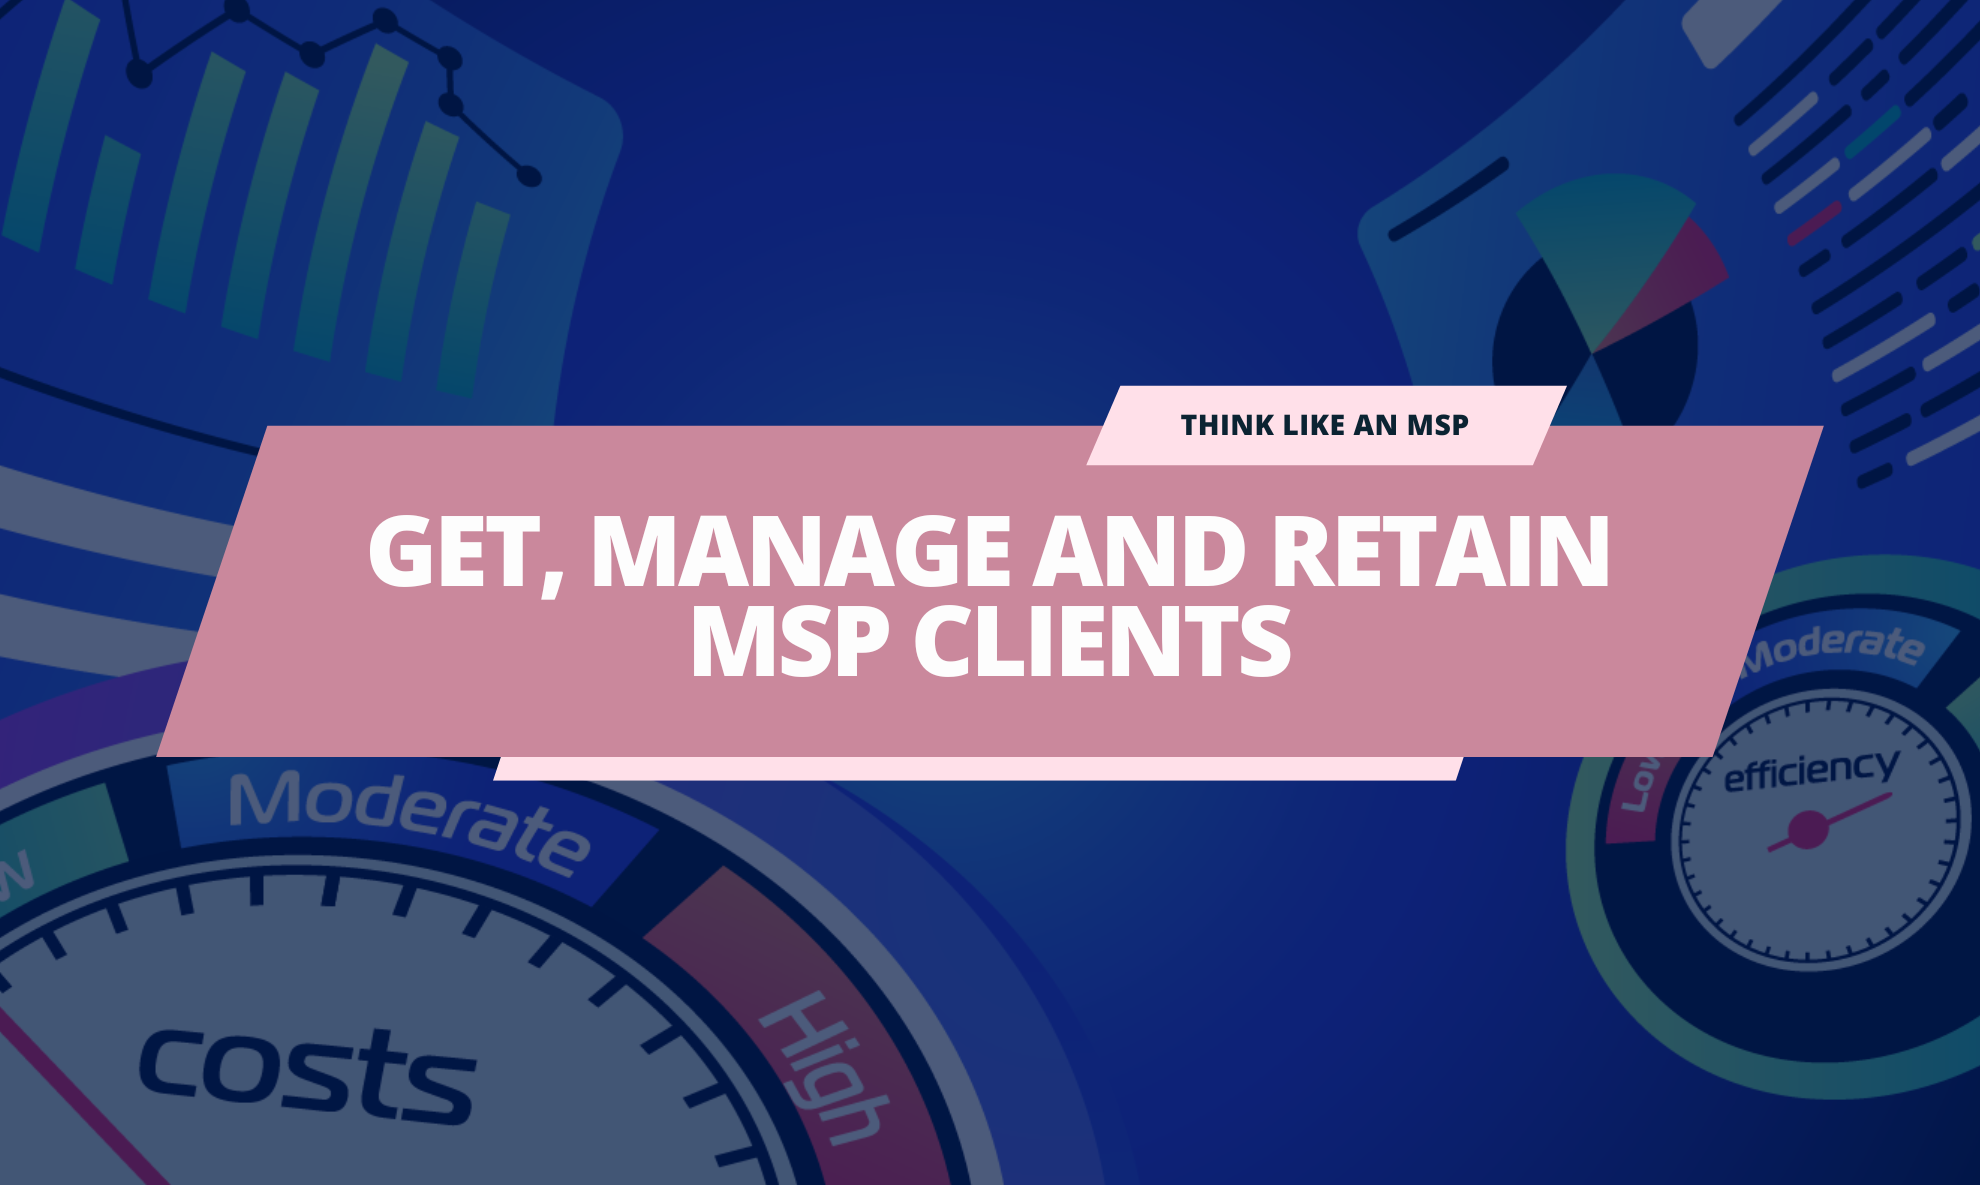 Top 7 Tips to Get, Manage and Retain MSP Clients